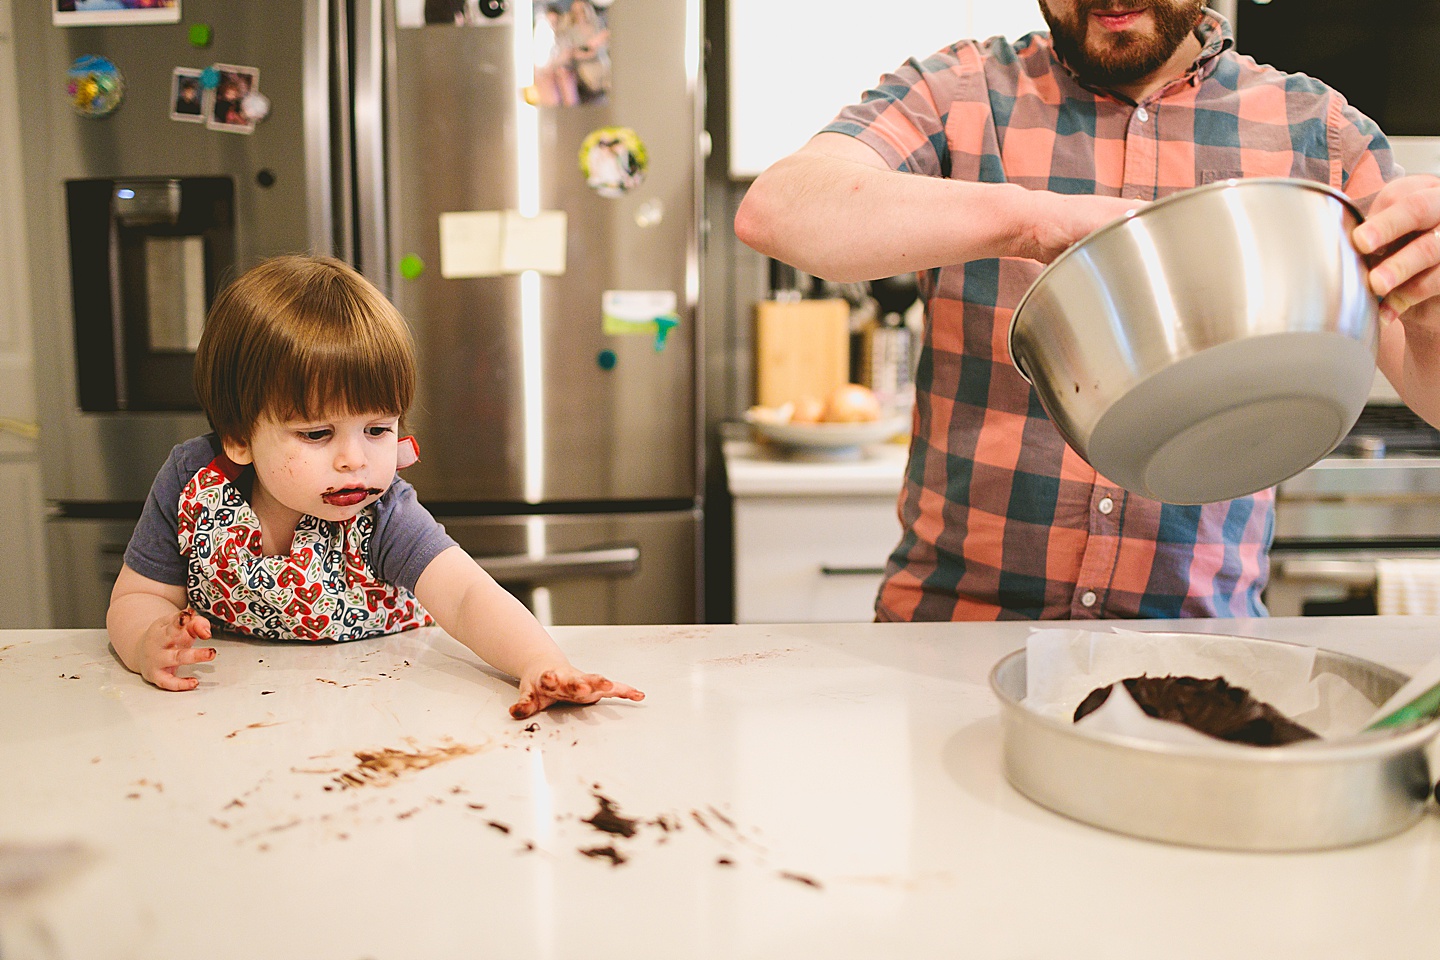 Toddler helps make brownies with parents